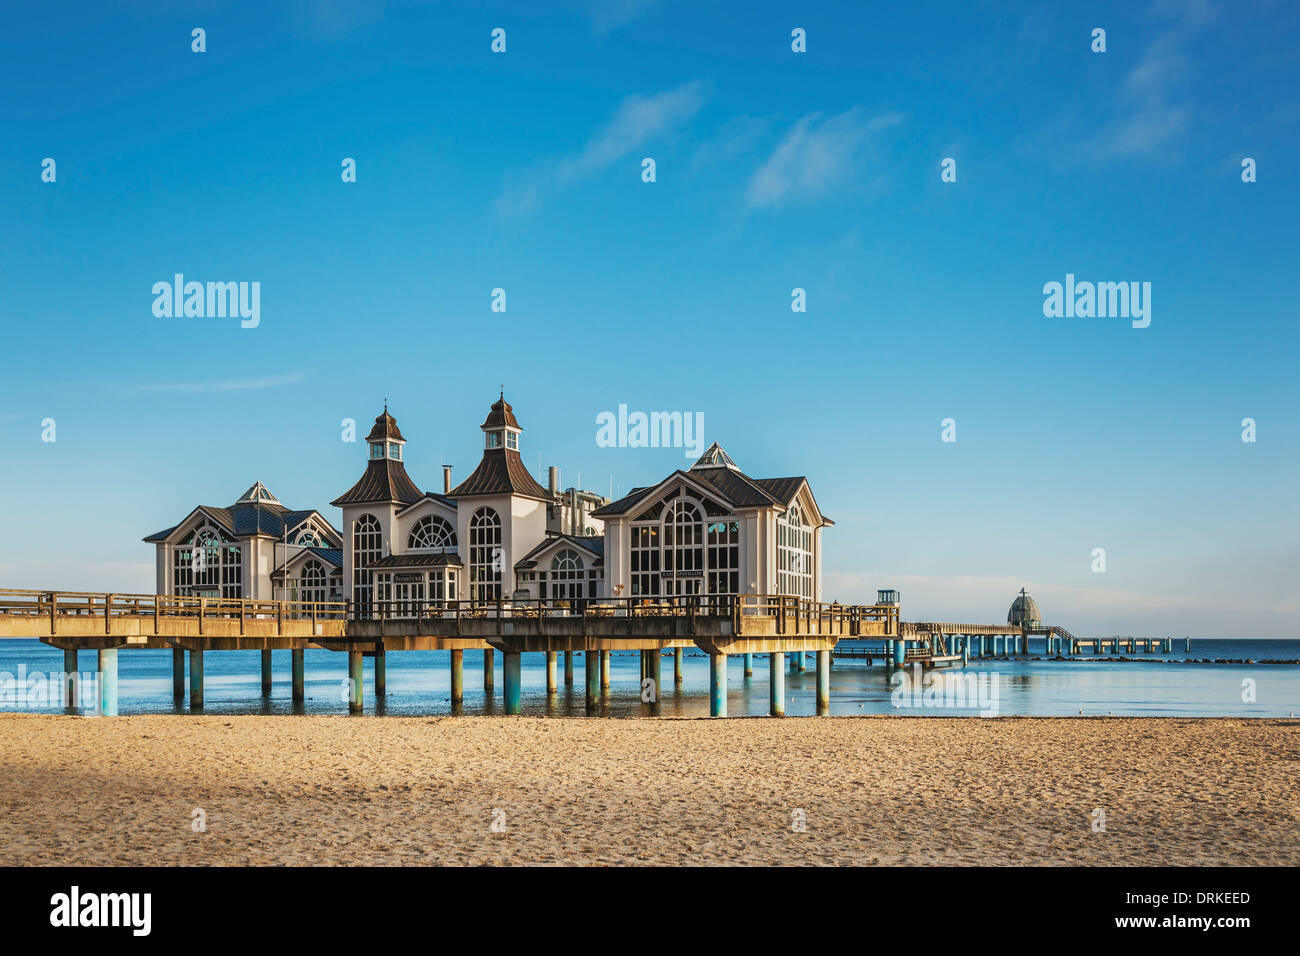 The Sellin Pier is a pier at the Baltic Sea, Sellin, Ruegen Island, Mecklenburg-Western Pomerania, Germany, Europe Stock Photo